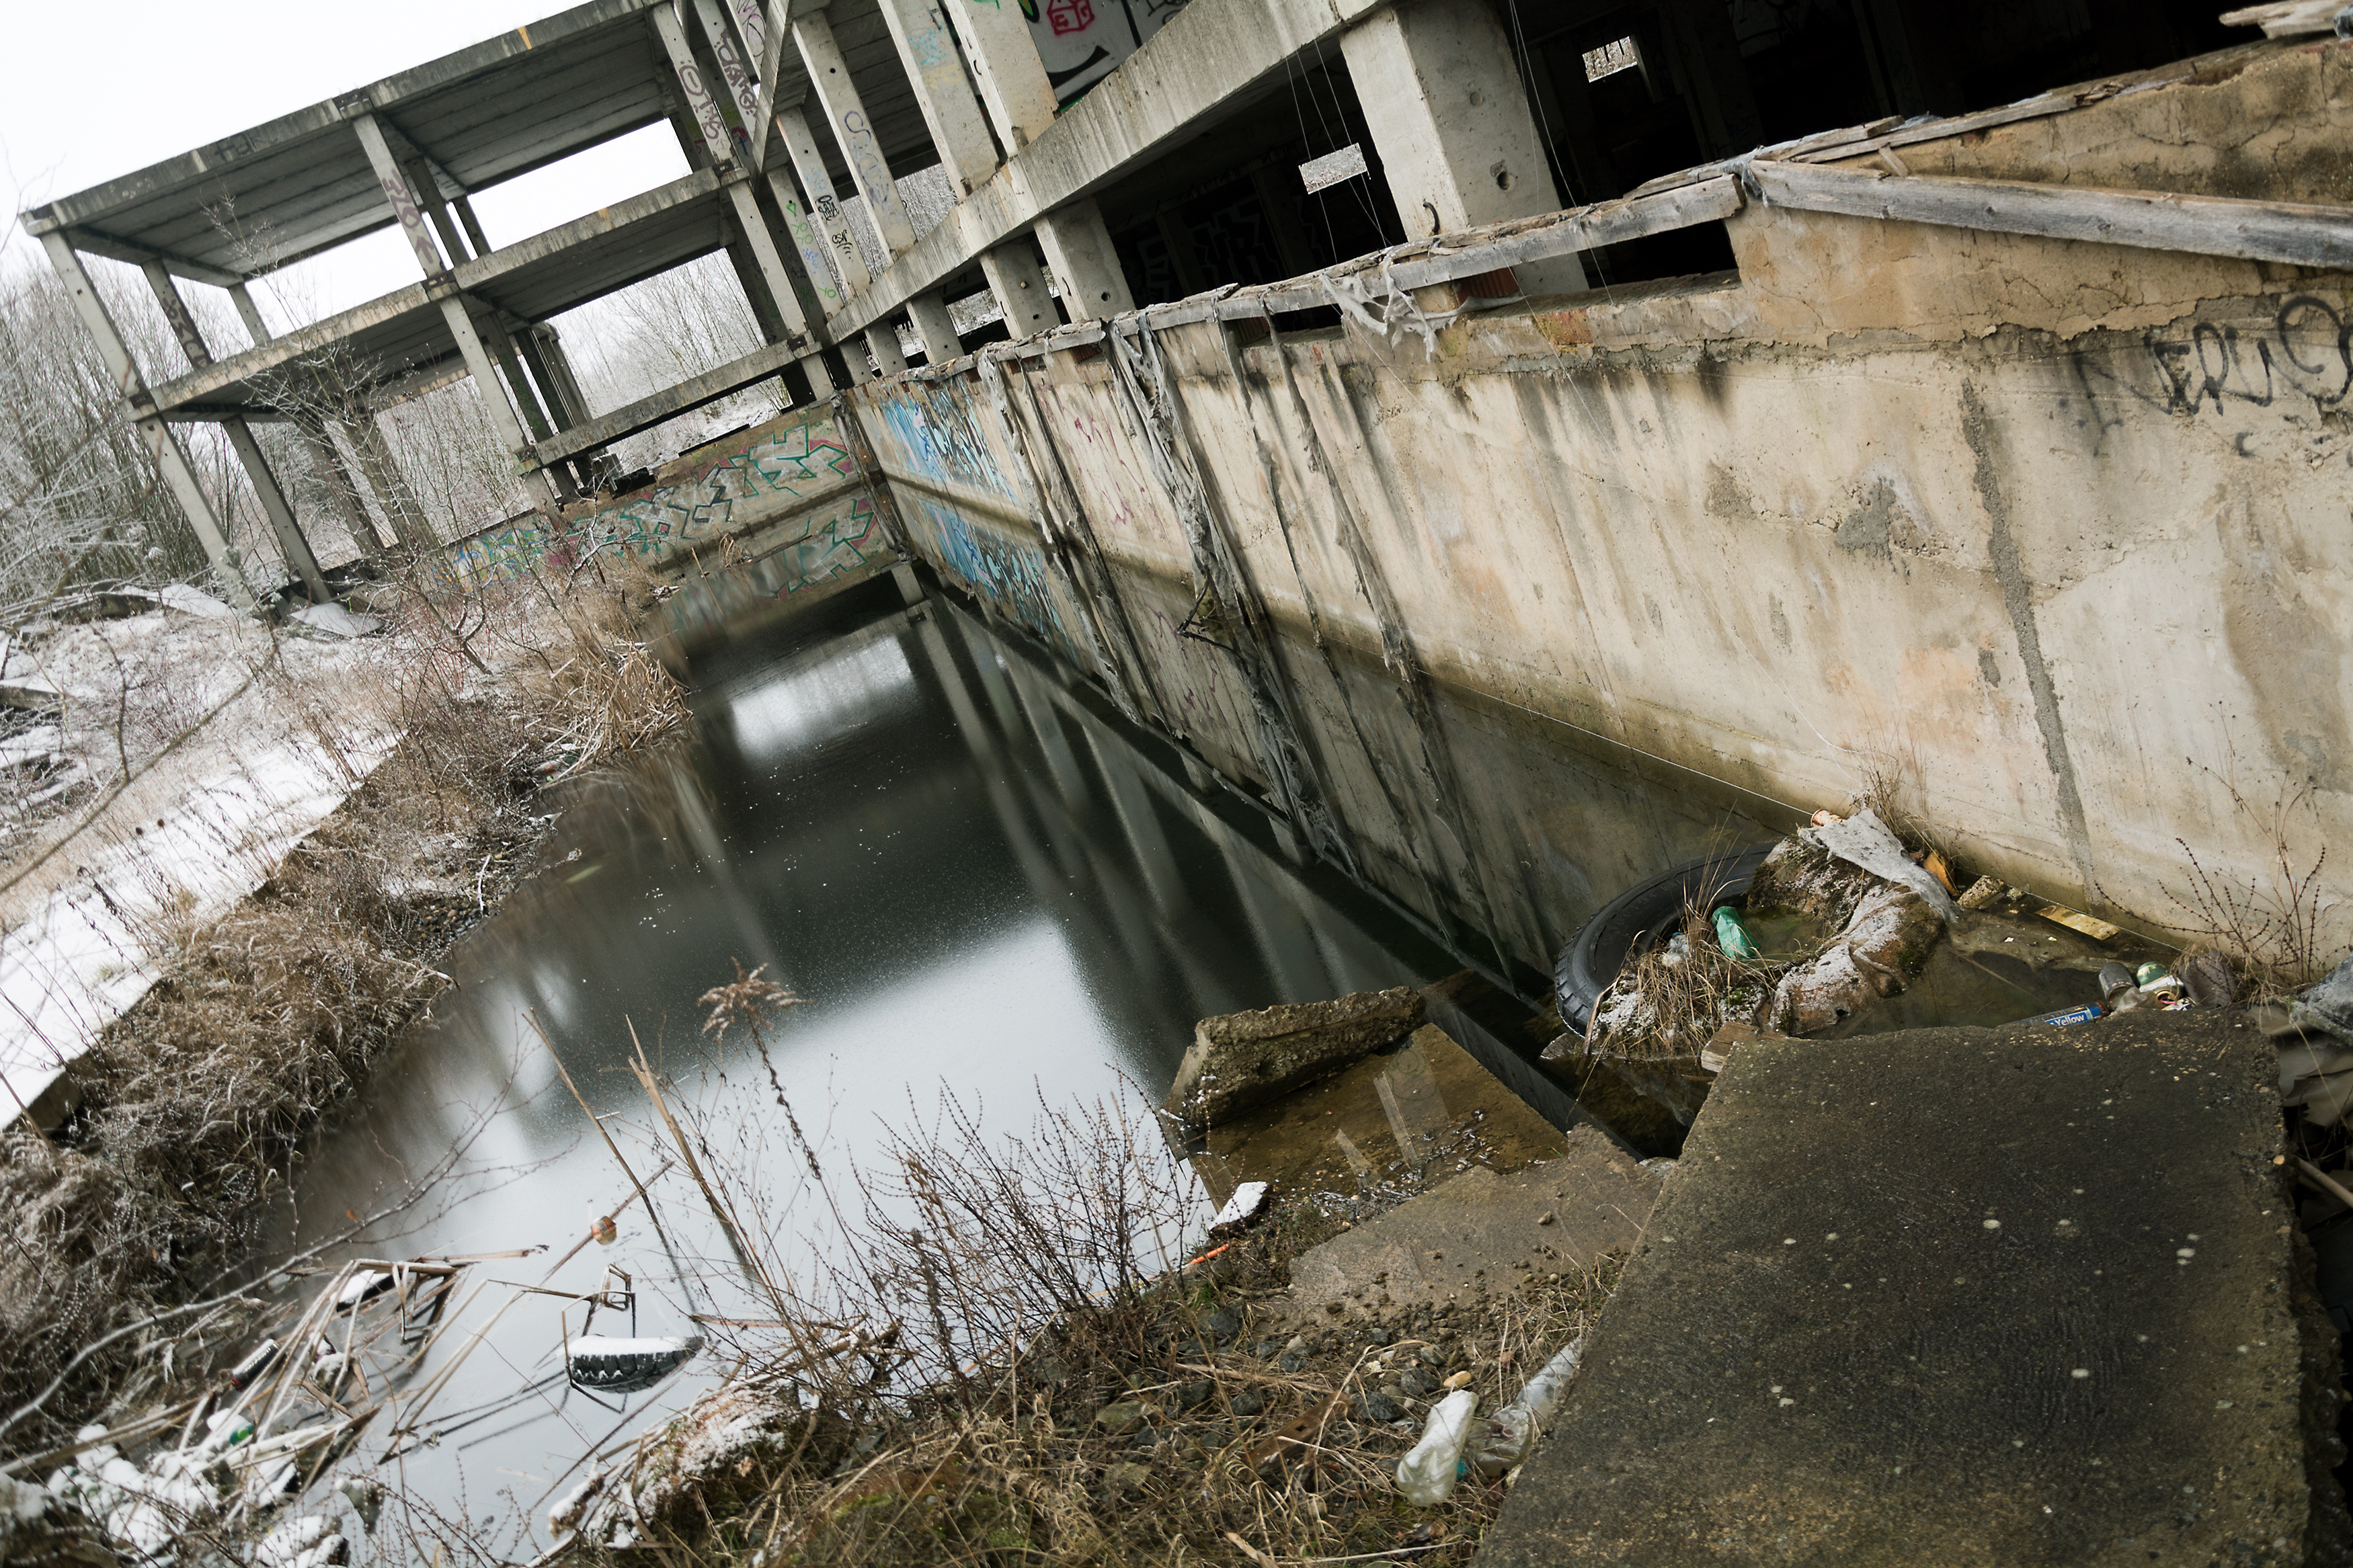 A large concrete building, covered in trash and graffiti, with a large pool of water by it